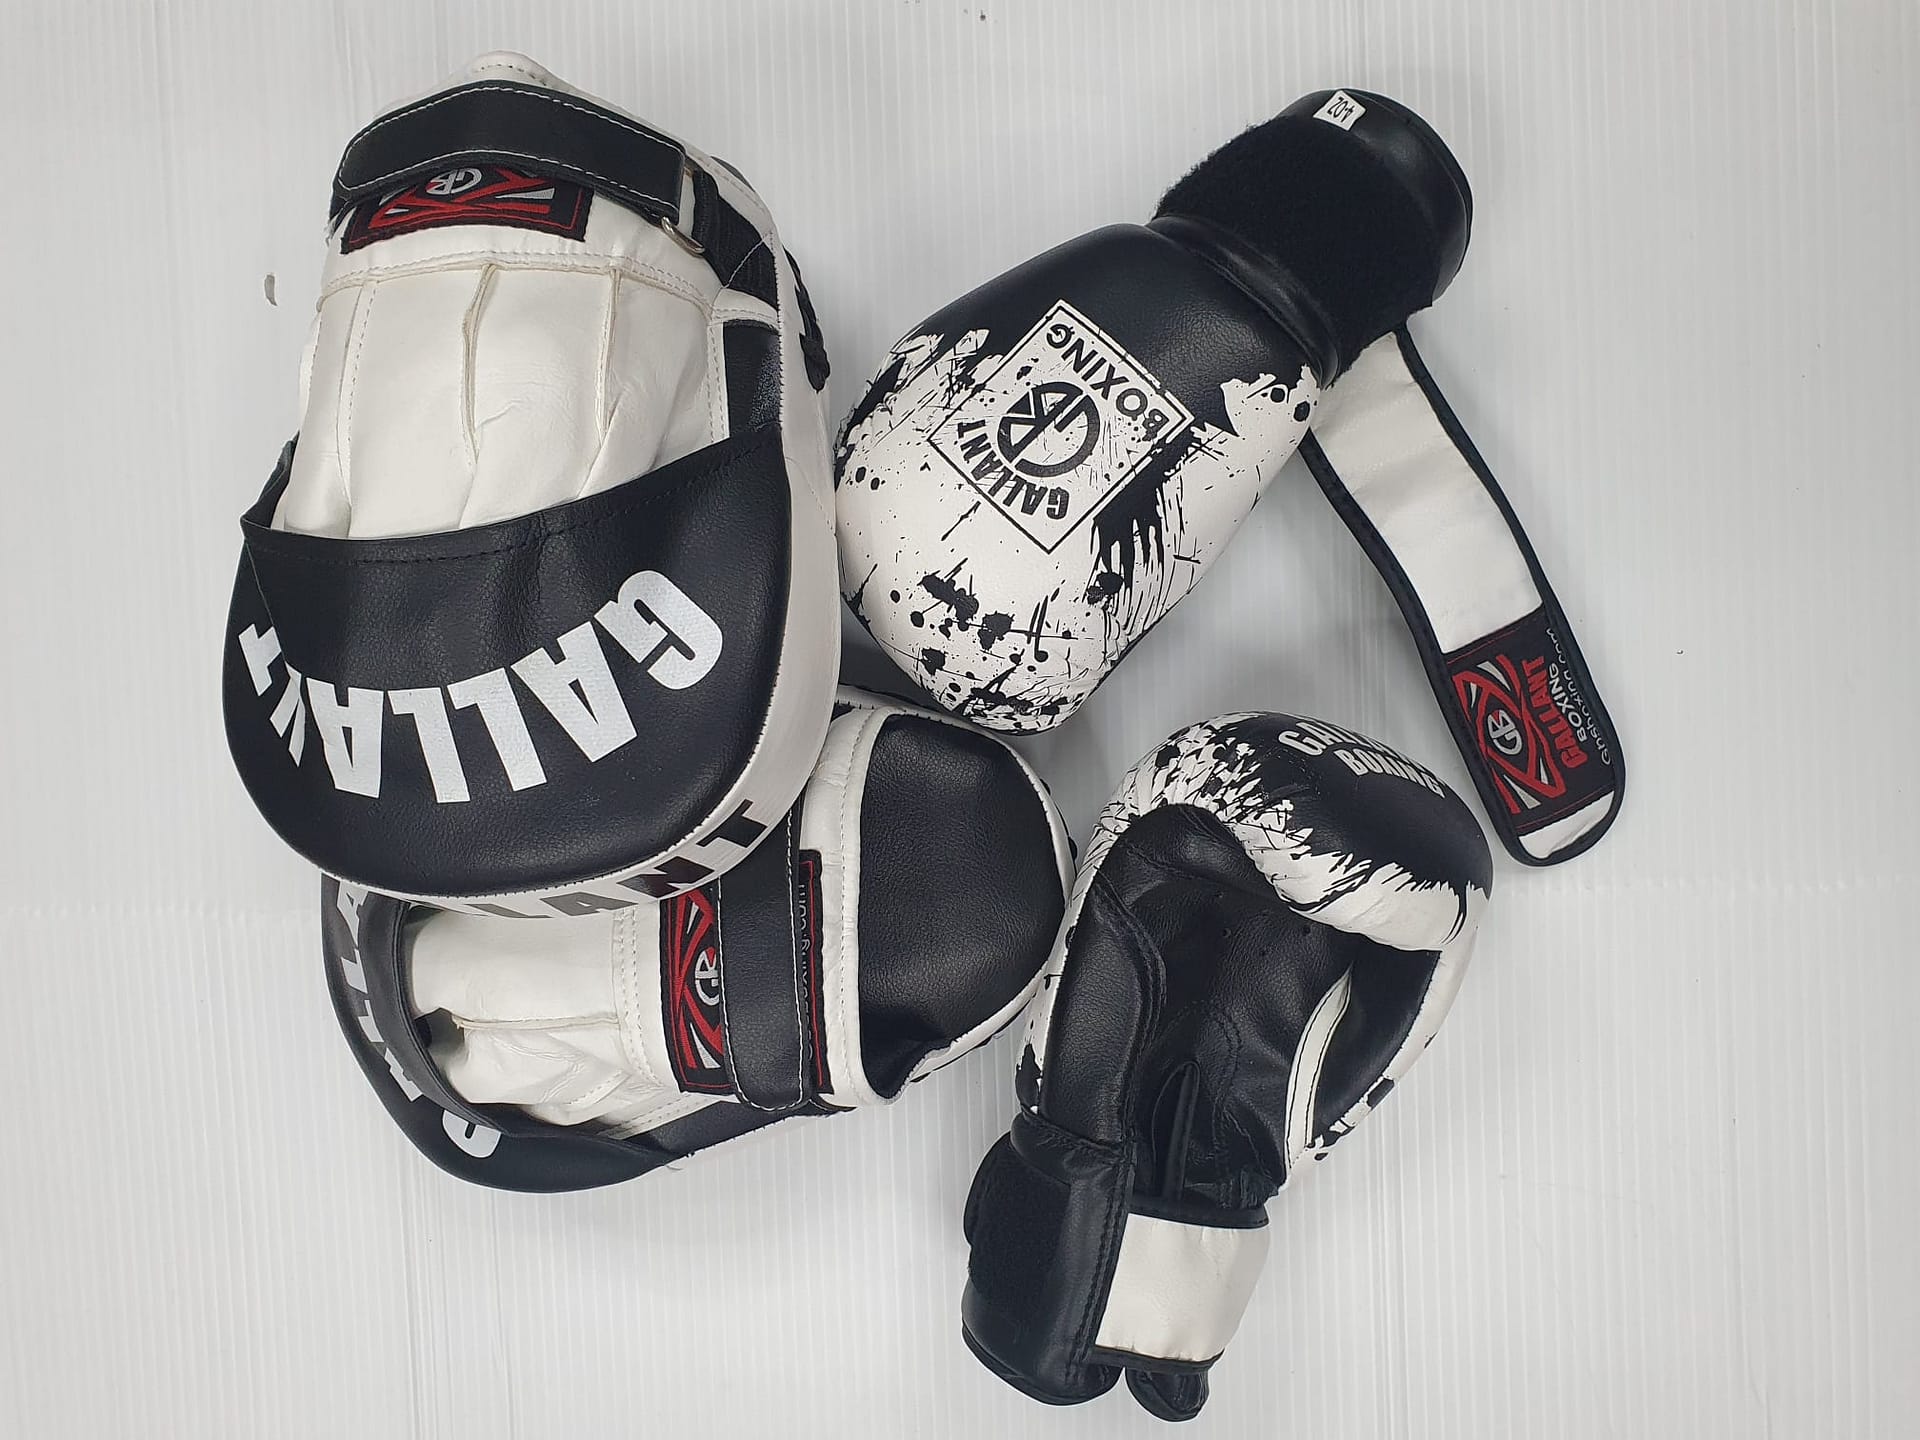 Gallant Boxing Gloves And Pads For Training, Sparring For Kids